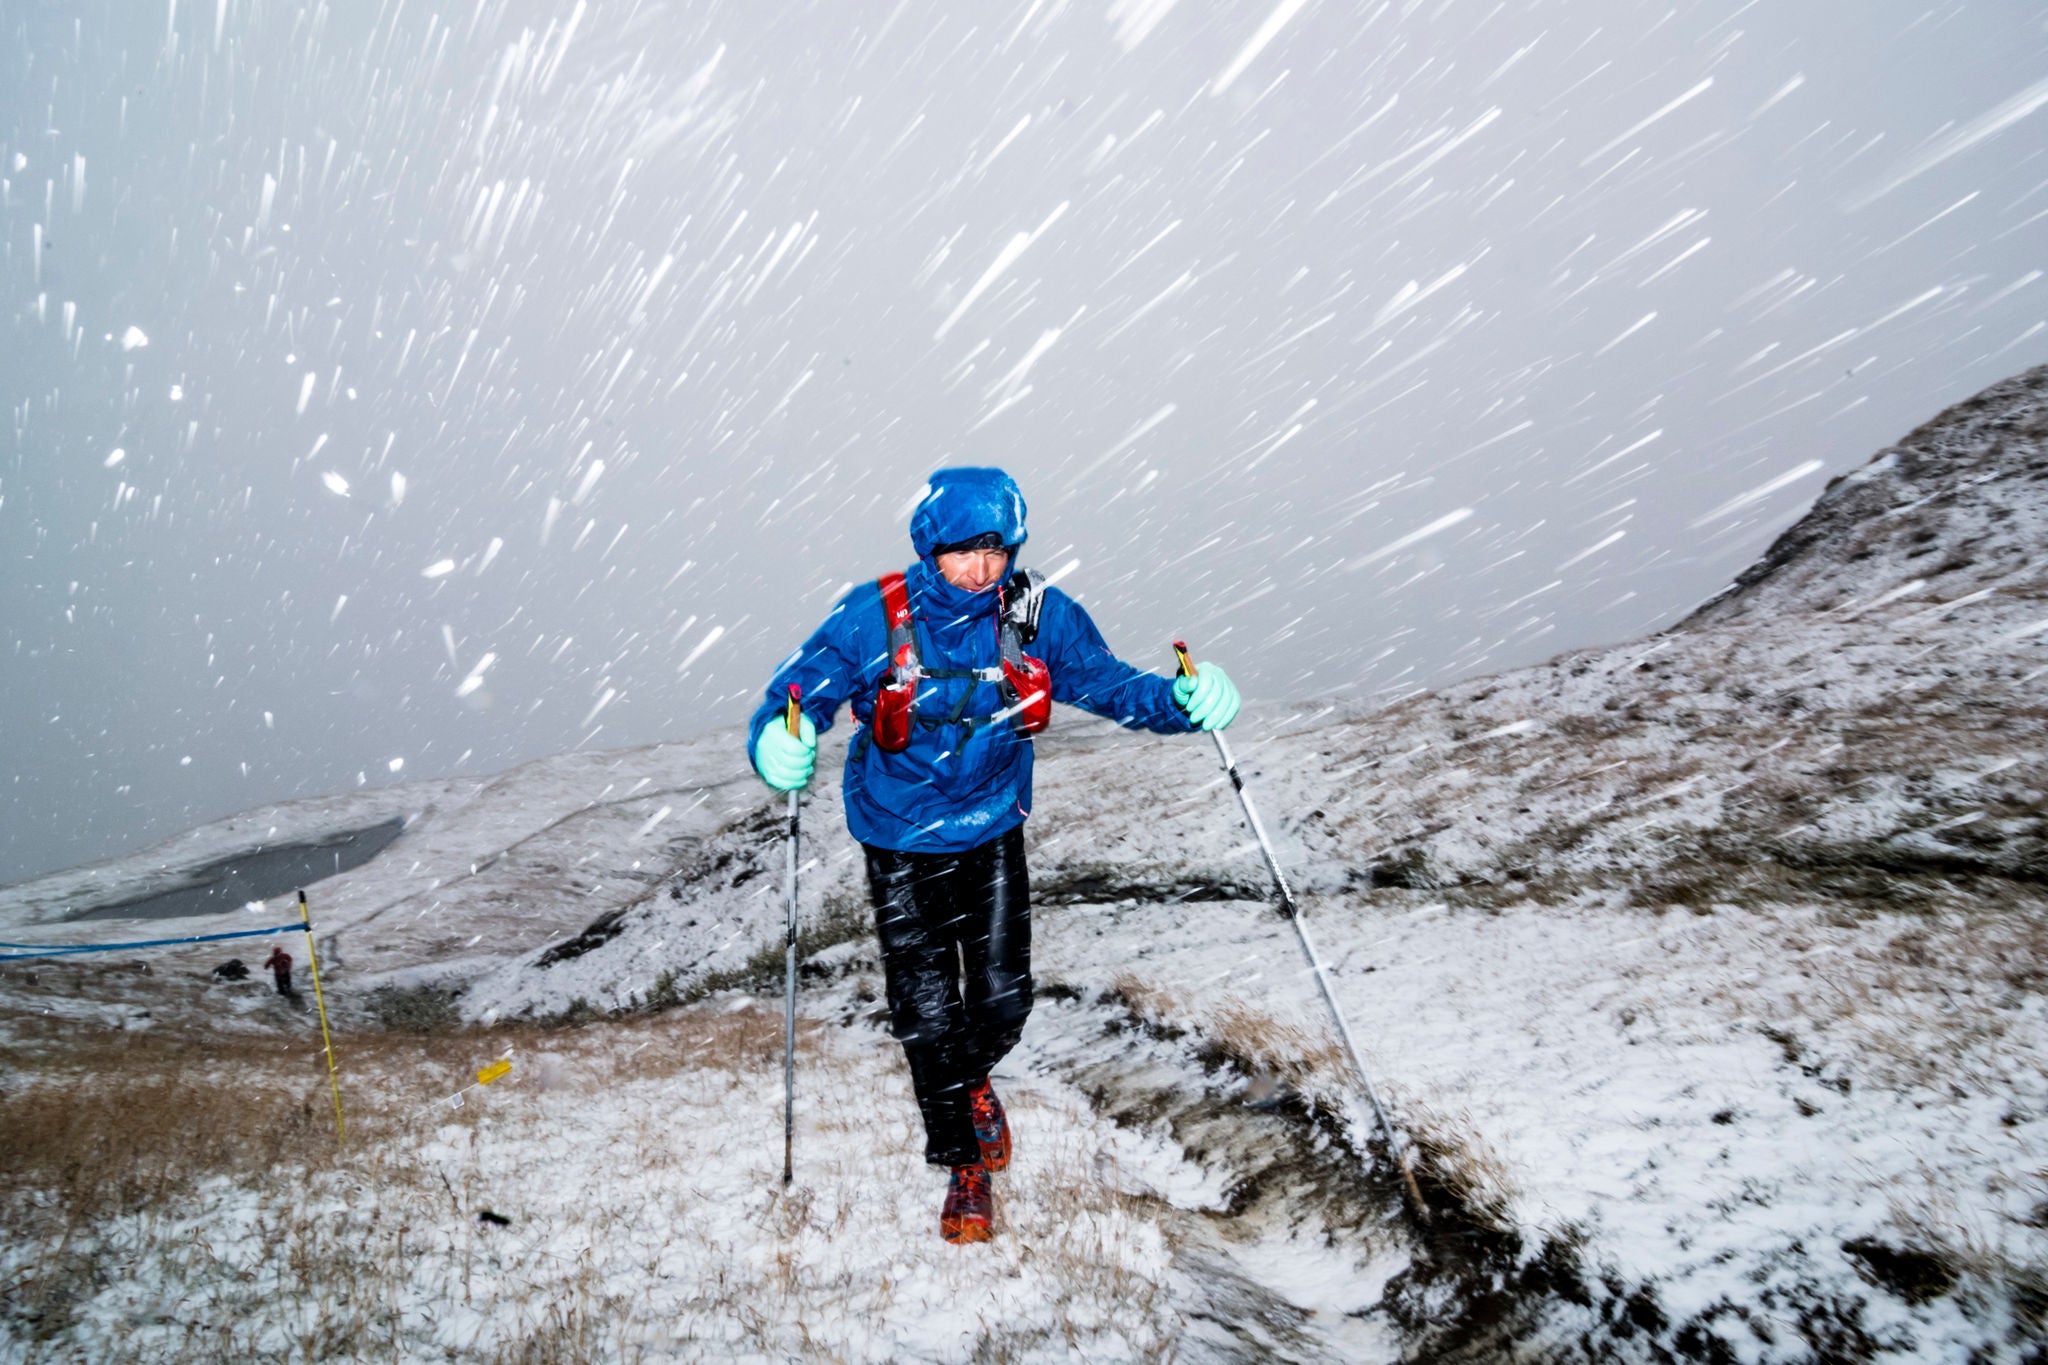 How to Run in Winter – 13 Tips for Running in the Cold